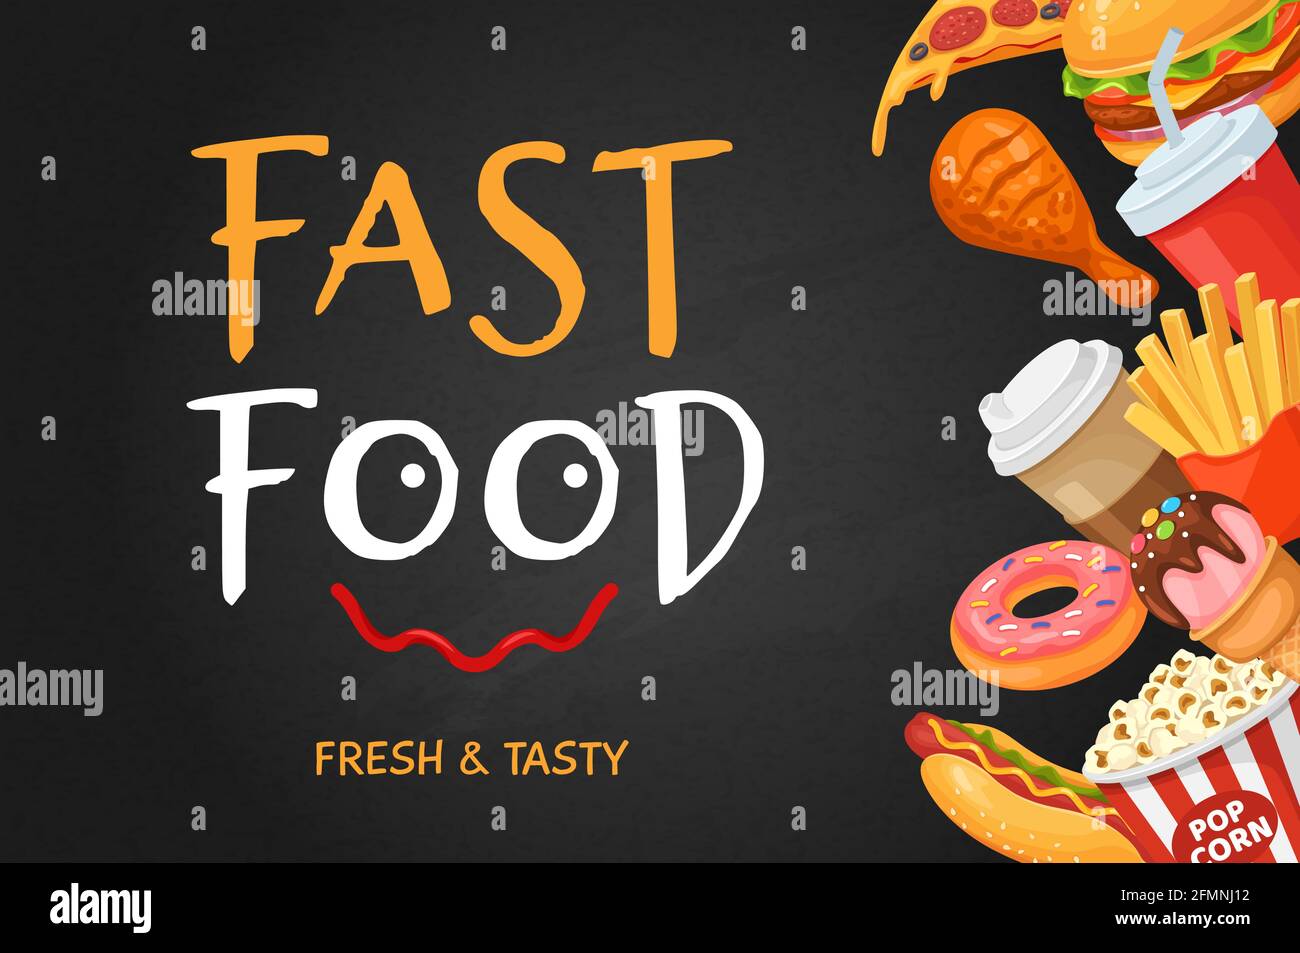 Fast food banner. Cartoon hot dog, popcorn and donut, coffee and pizza,  chicken, cola and ice cream, burger. Fast food restaurant vector flyer.  Cafe advertisement with junk food meals Stock Vector Image